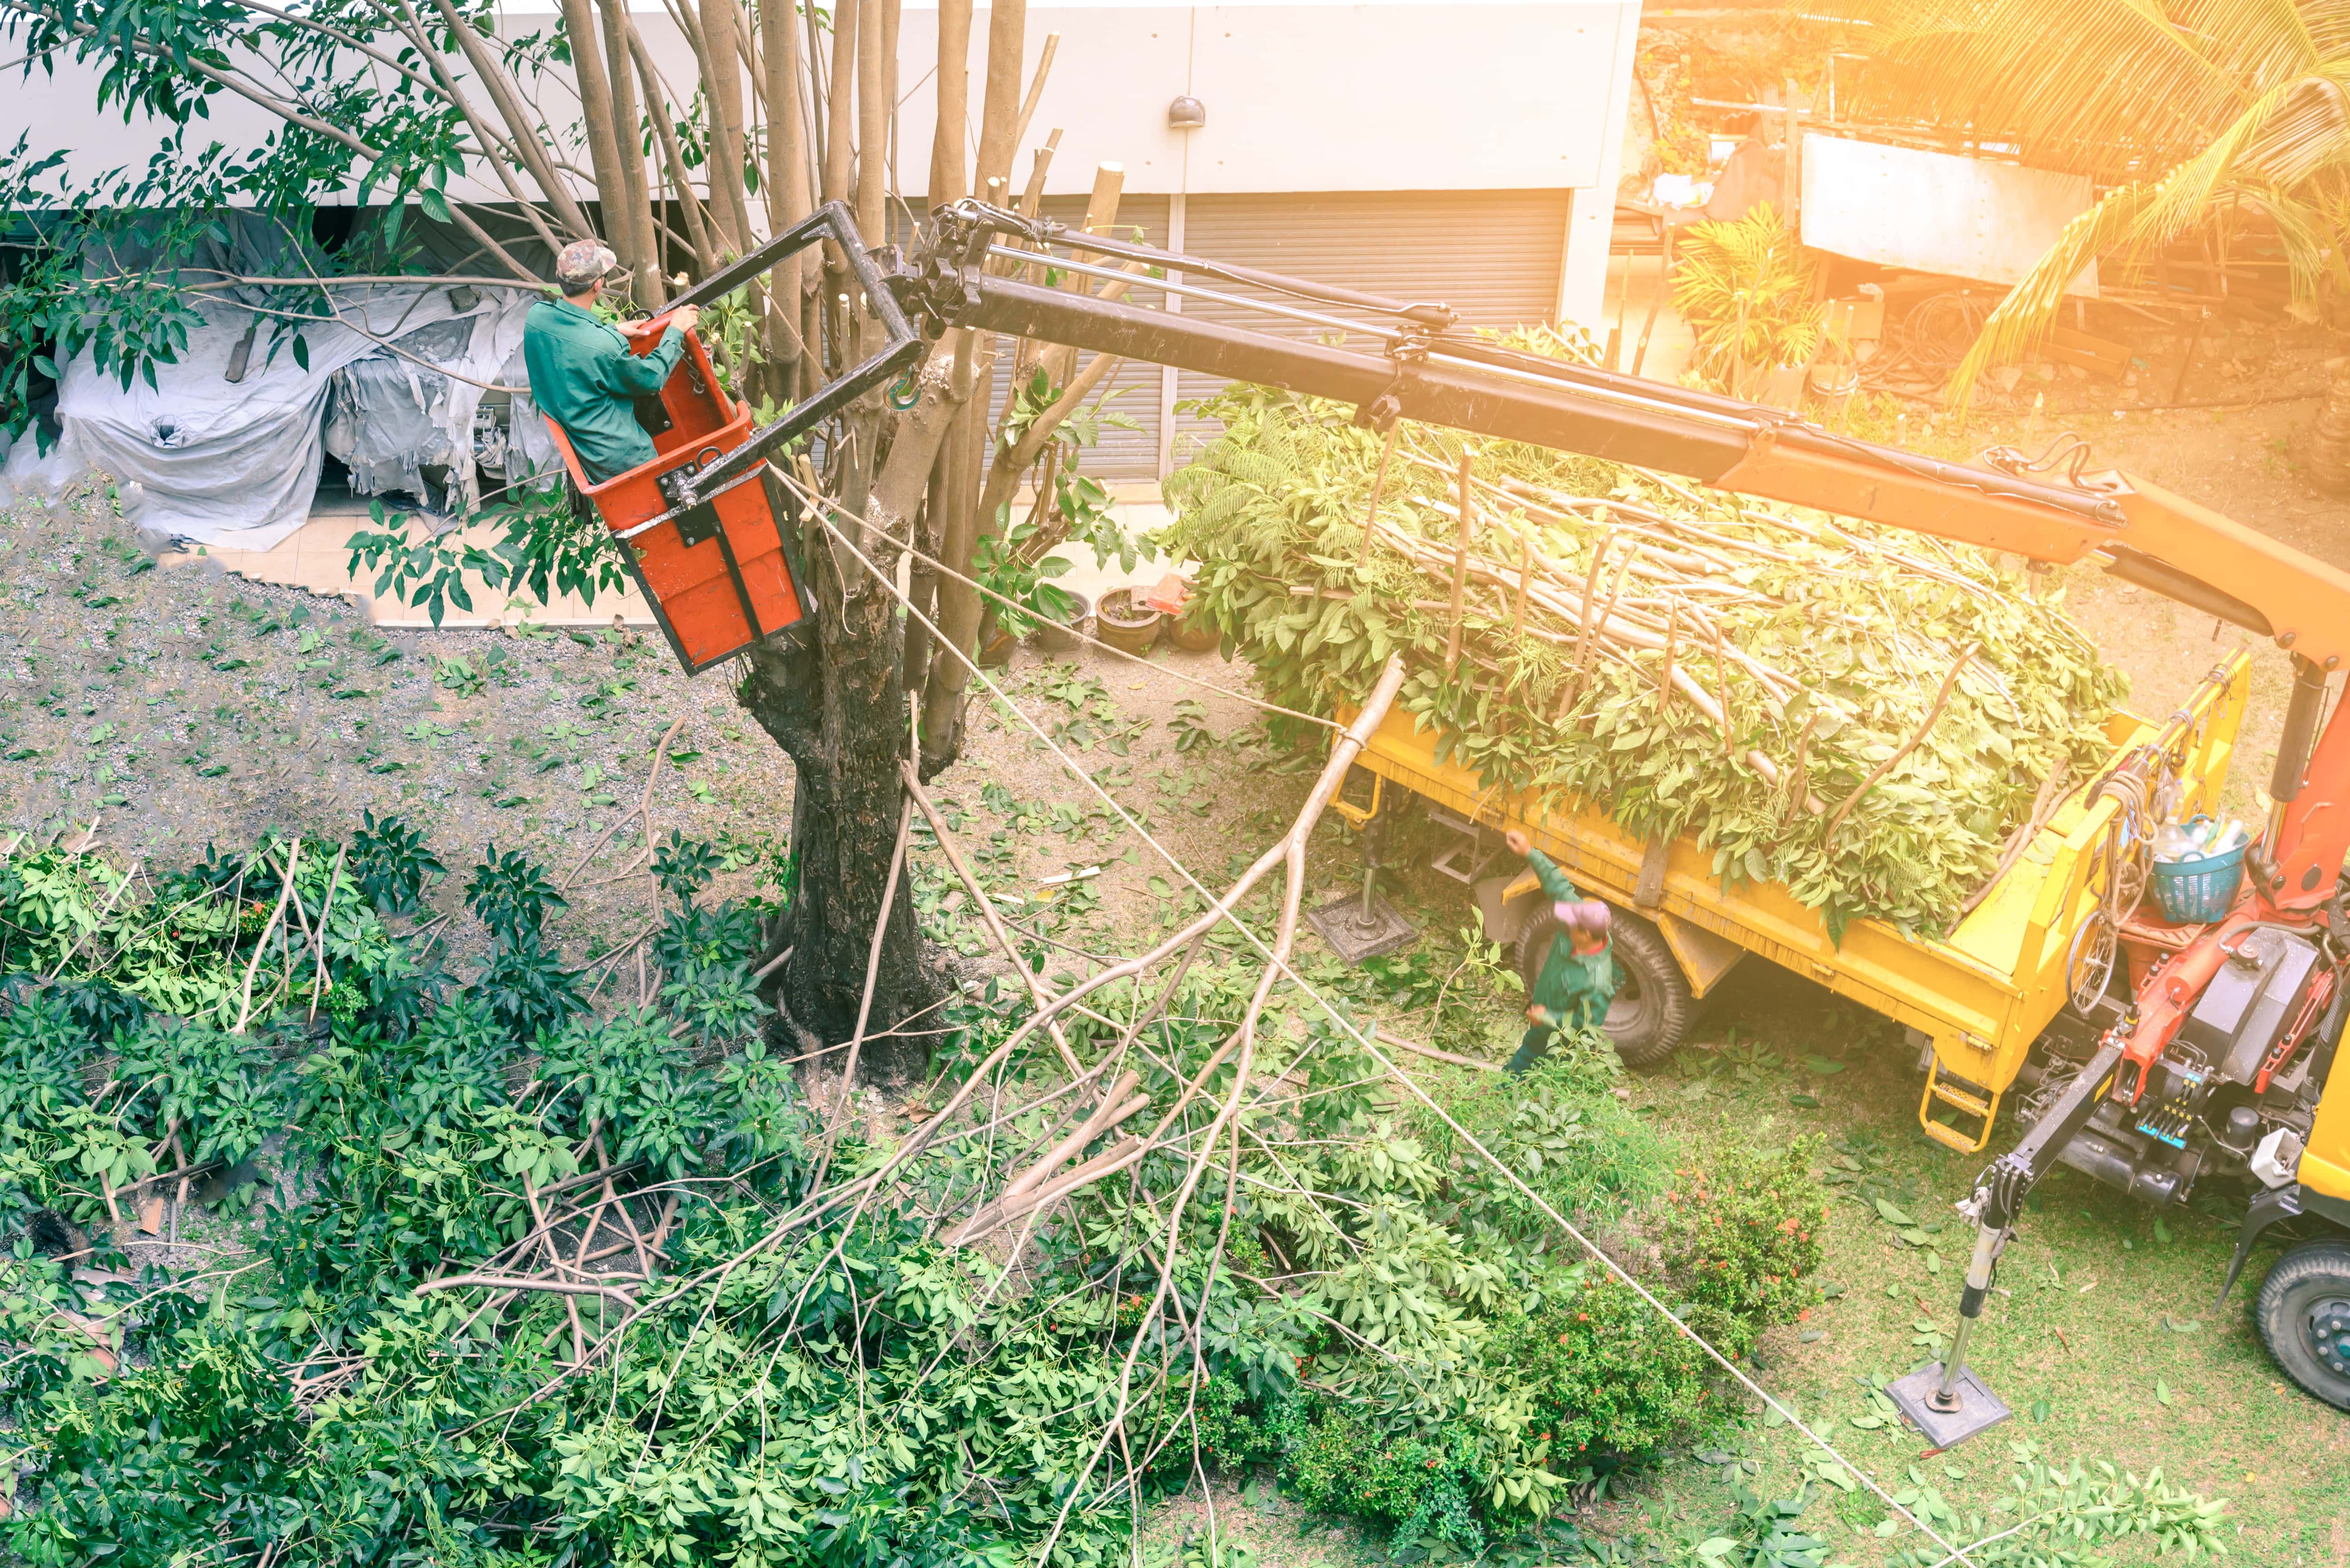 an image of a man in a tree lift cutting down branches